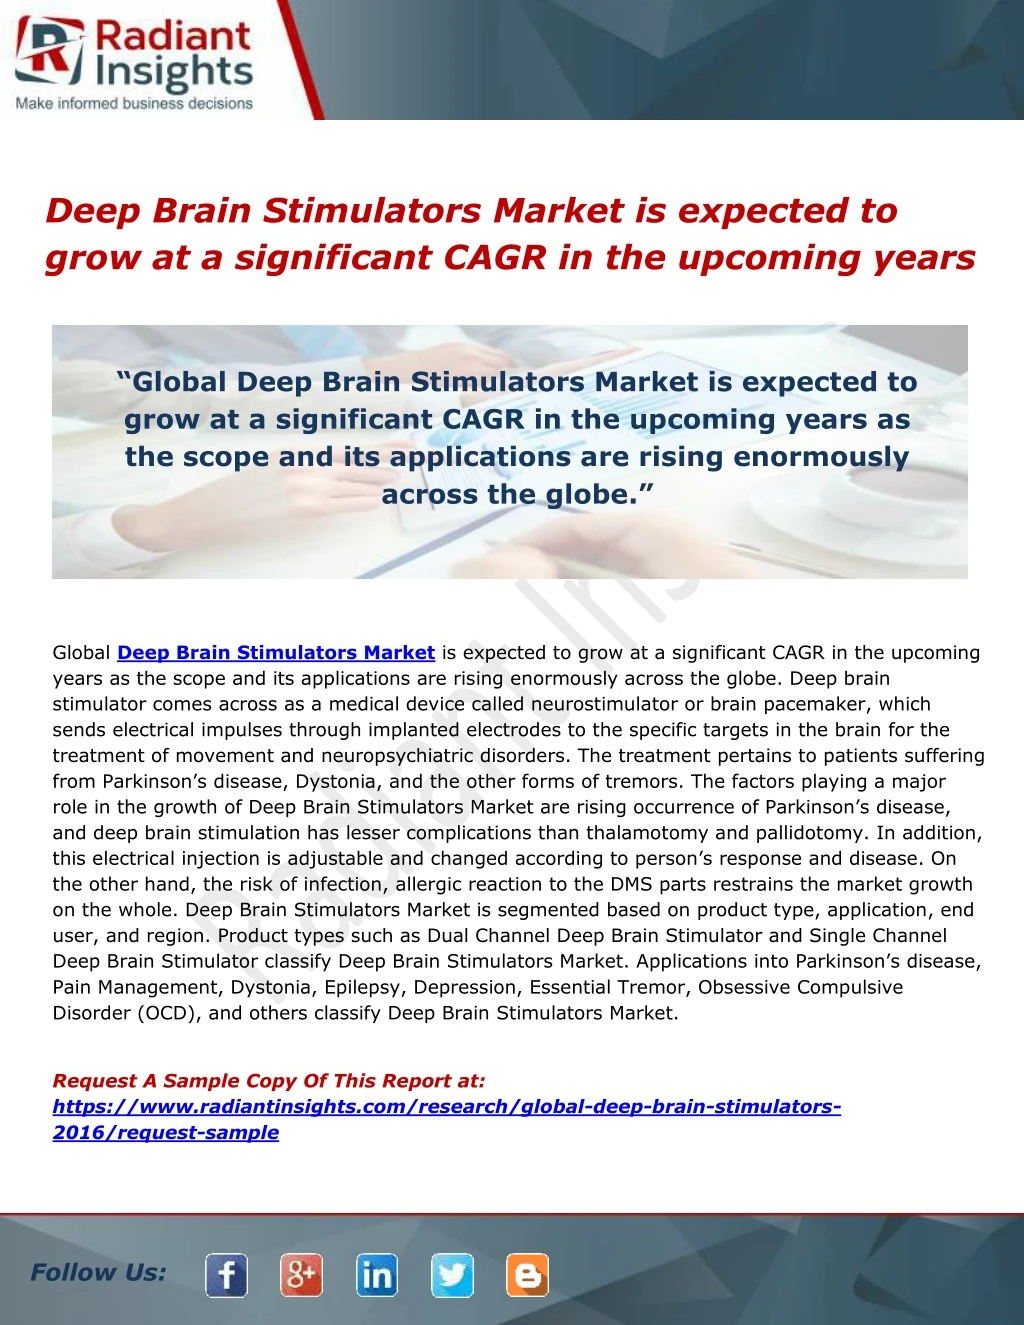 deep brain stimulators market is expected to grow